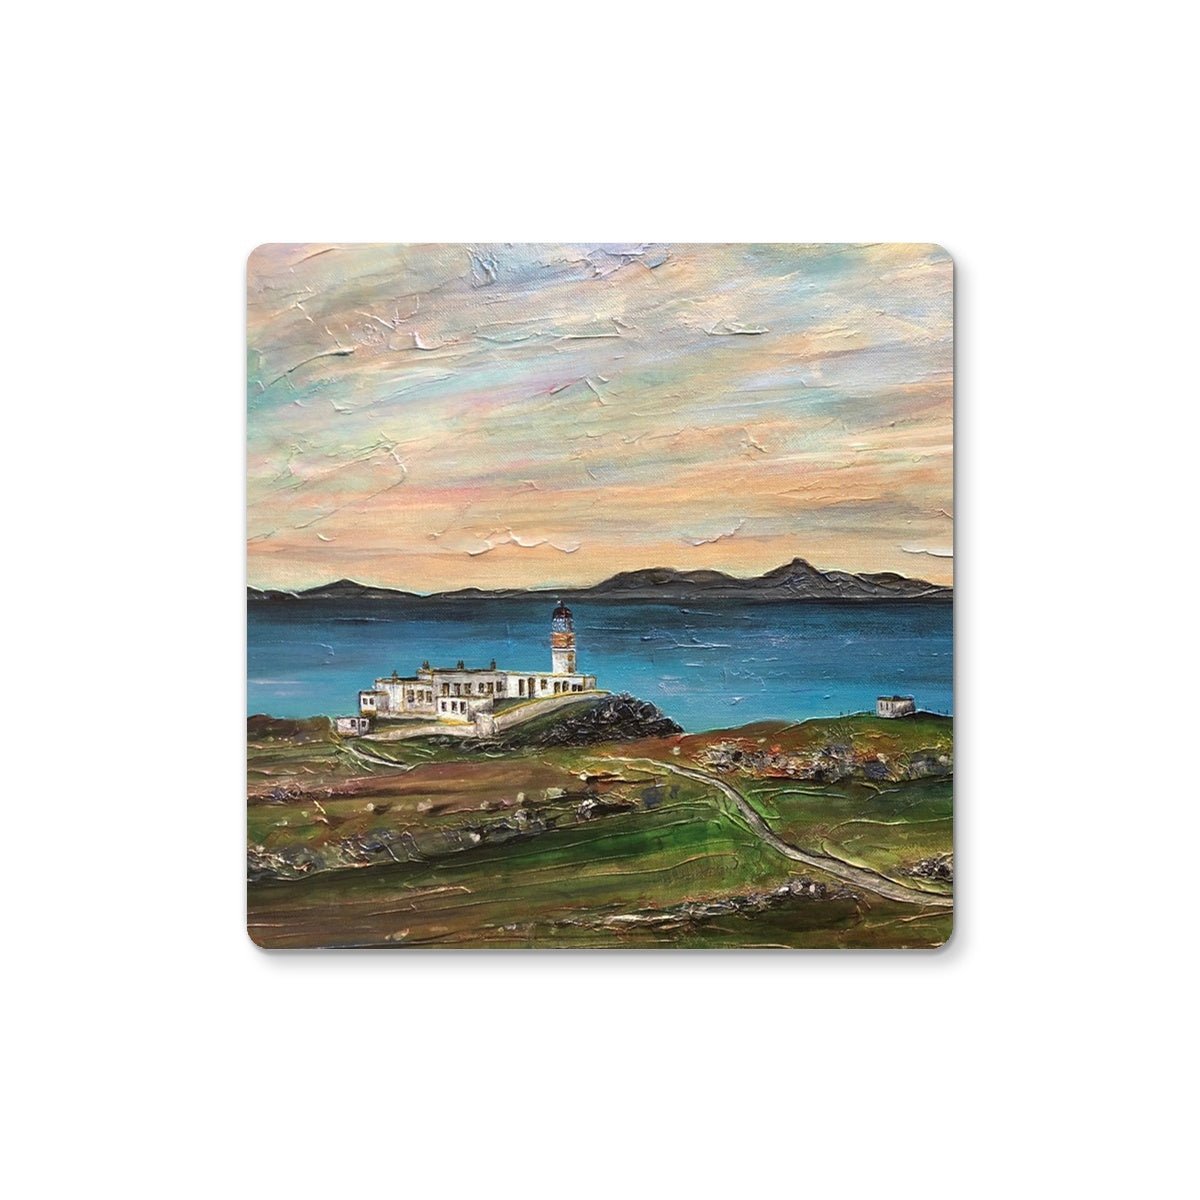 Neist Point Skye Art Gifts Coaster-Coasters-Skye Art Gallery-2 Coasters-Paintings, Prints, Homeware, Art Gifts From Scotland By Scottish Artist Kevin Hunter